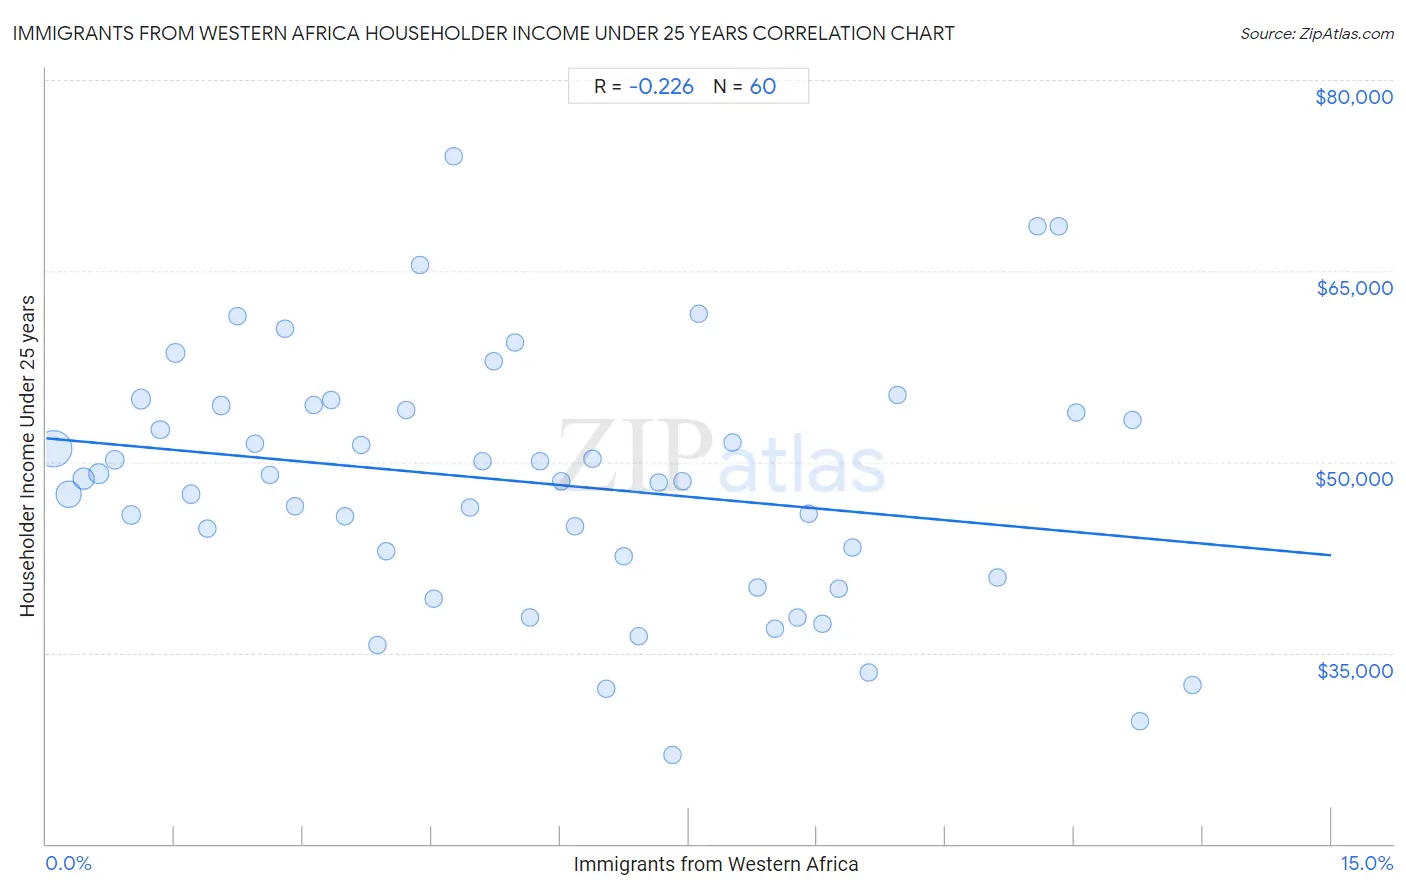 Immigrants from Western Africa Householder Income Under 25 years